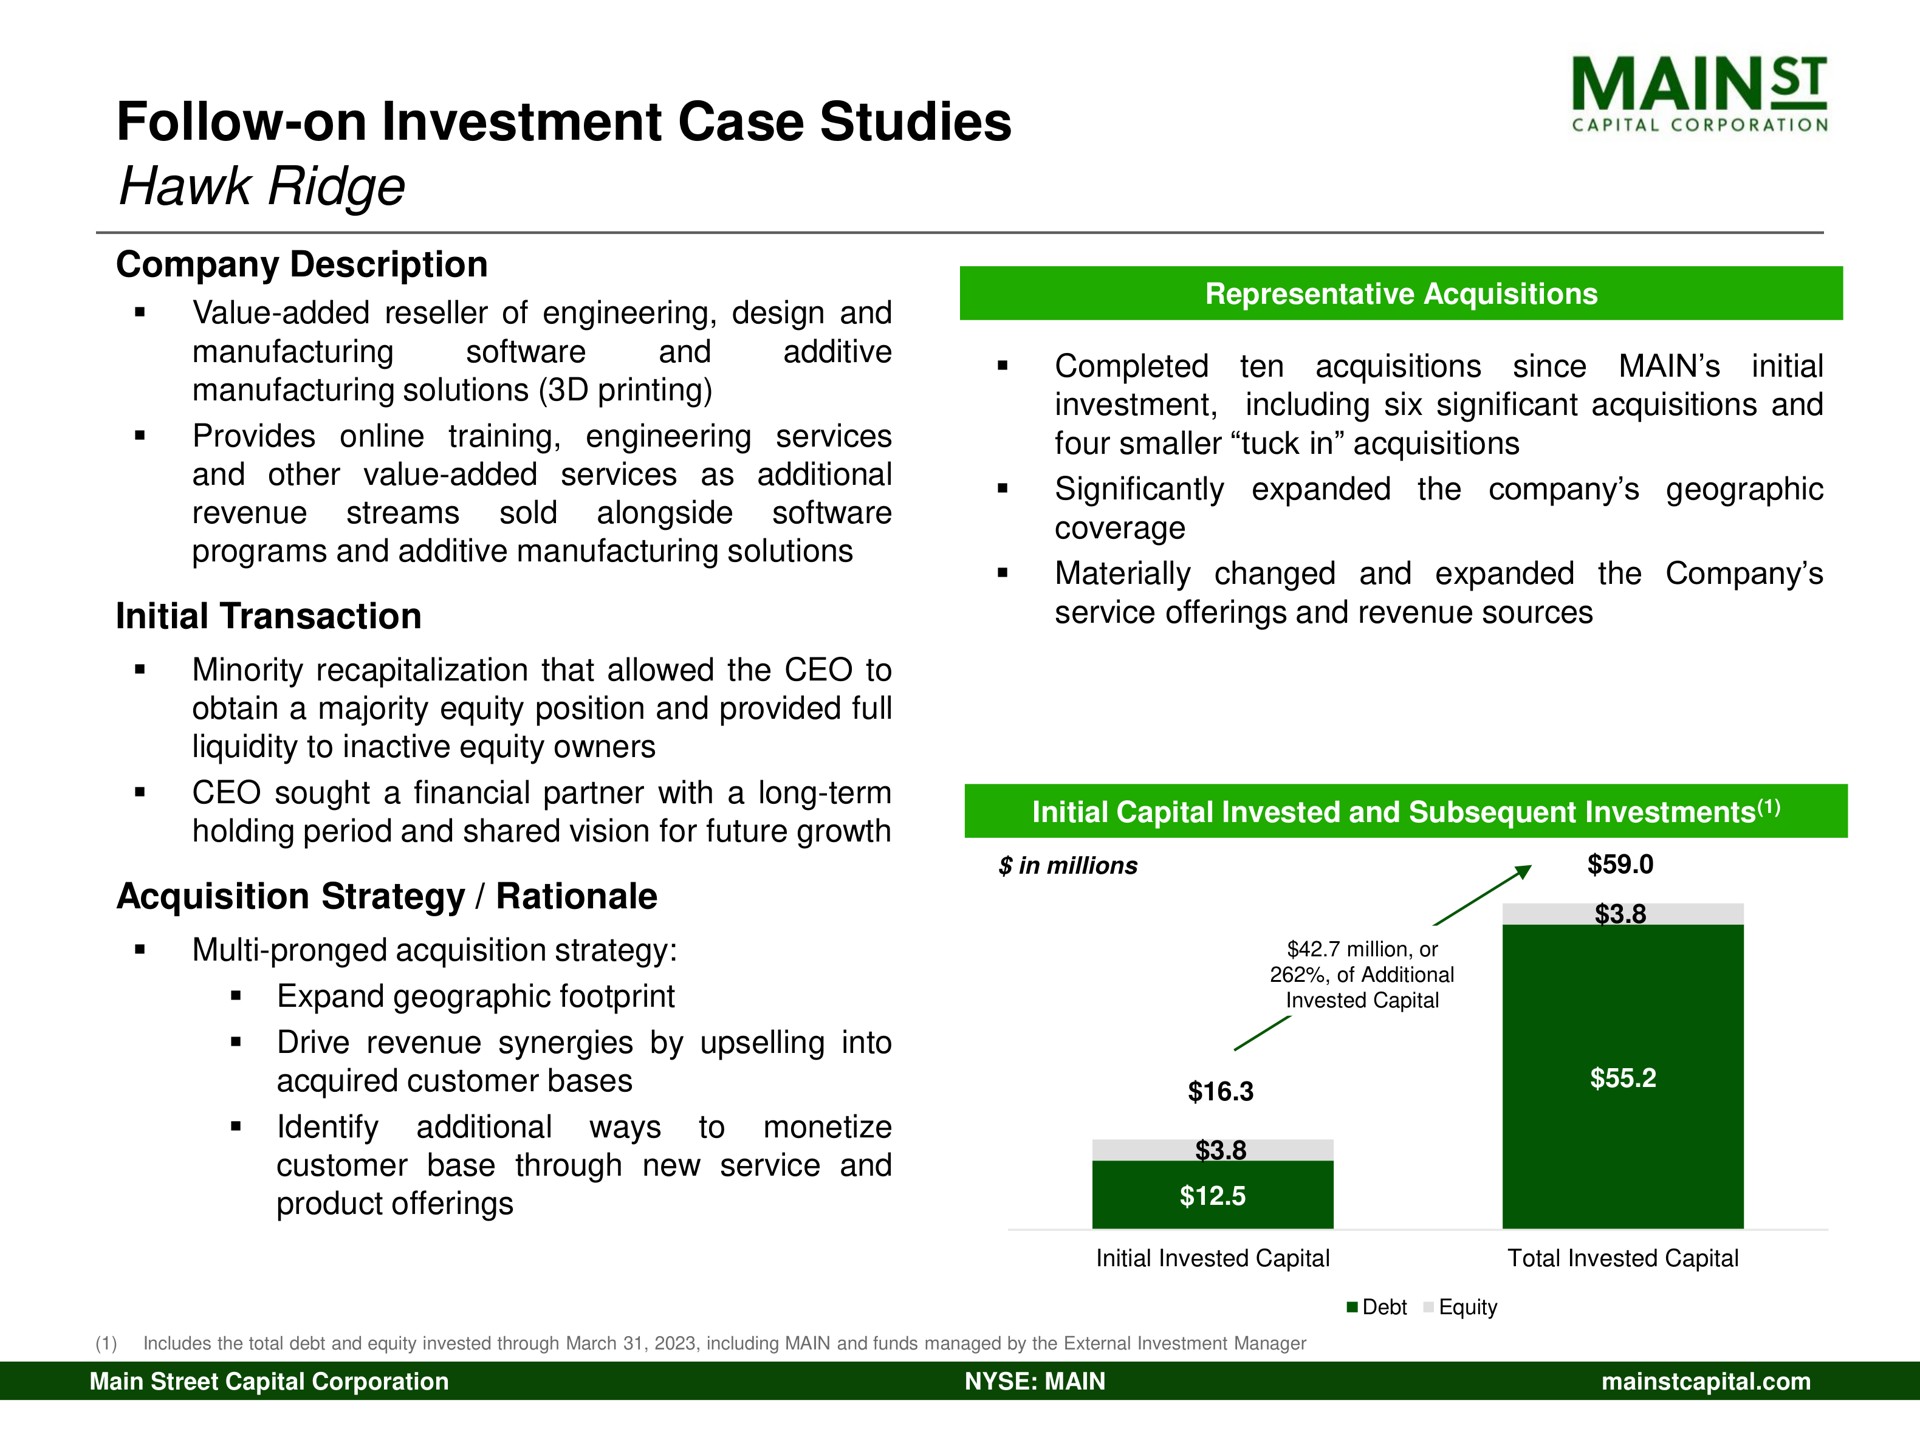 follow on investment case studies hawk ridge omen period end shared vision for future growth | Main Street Capital